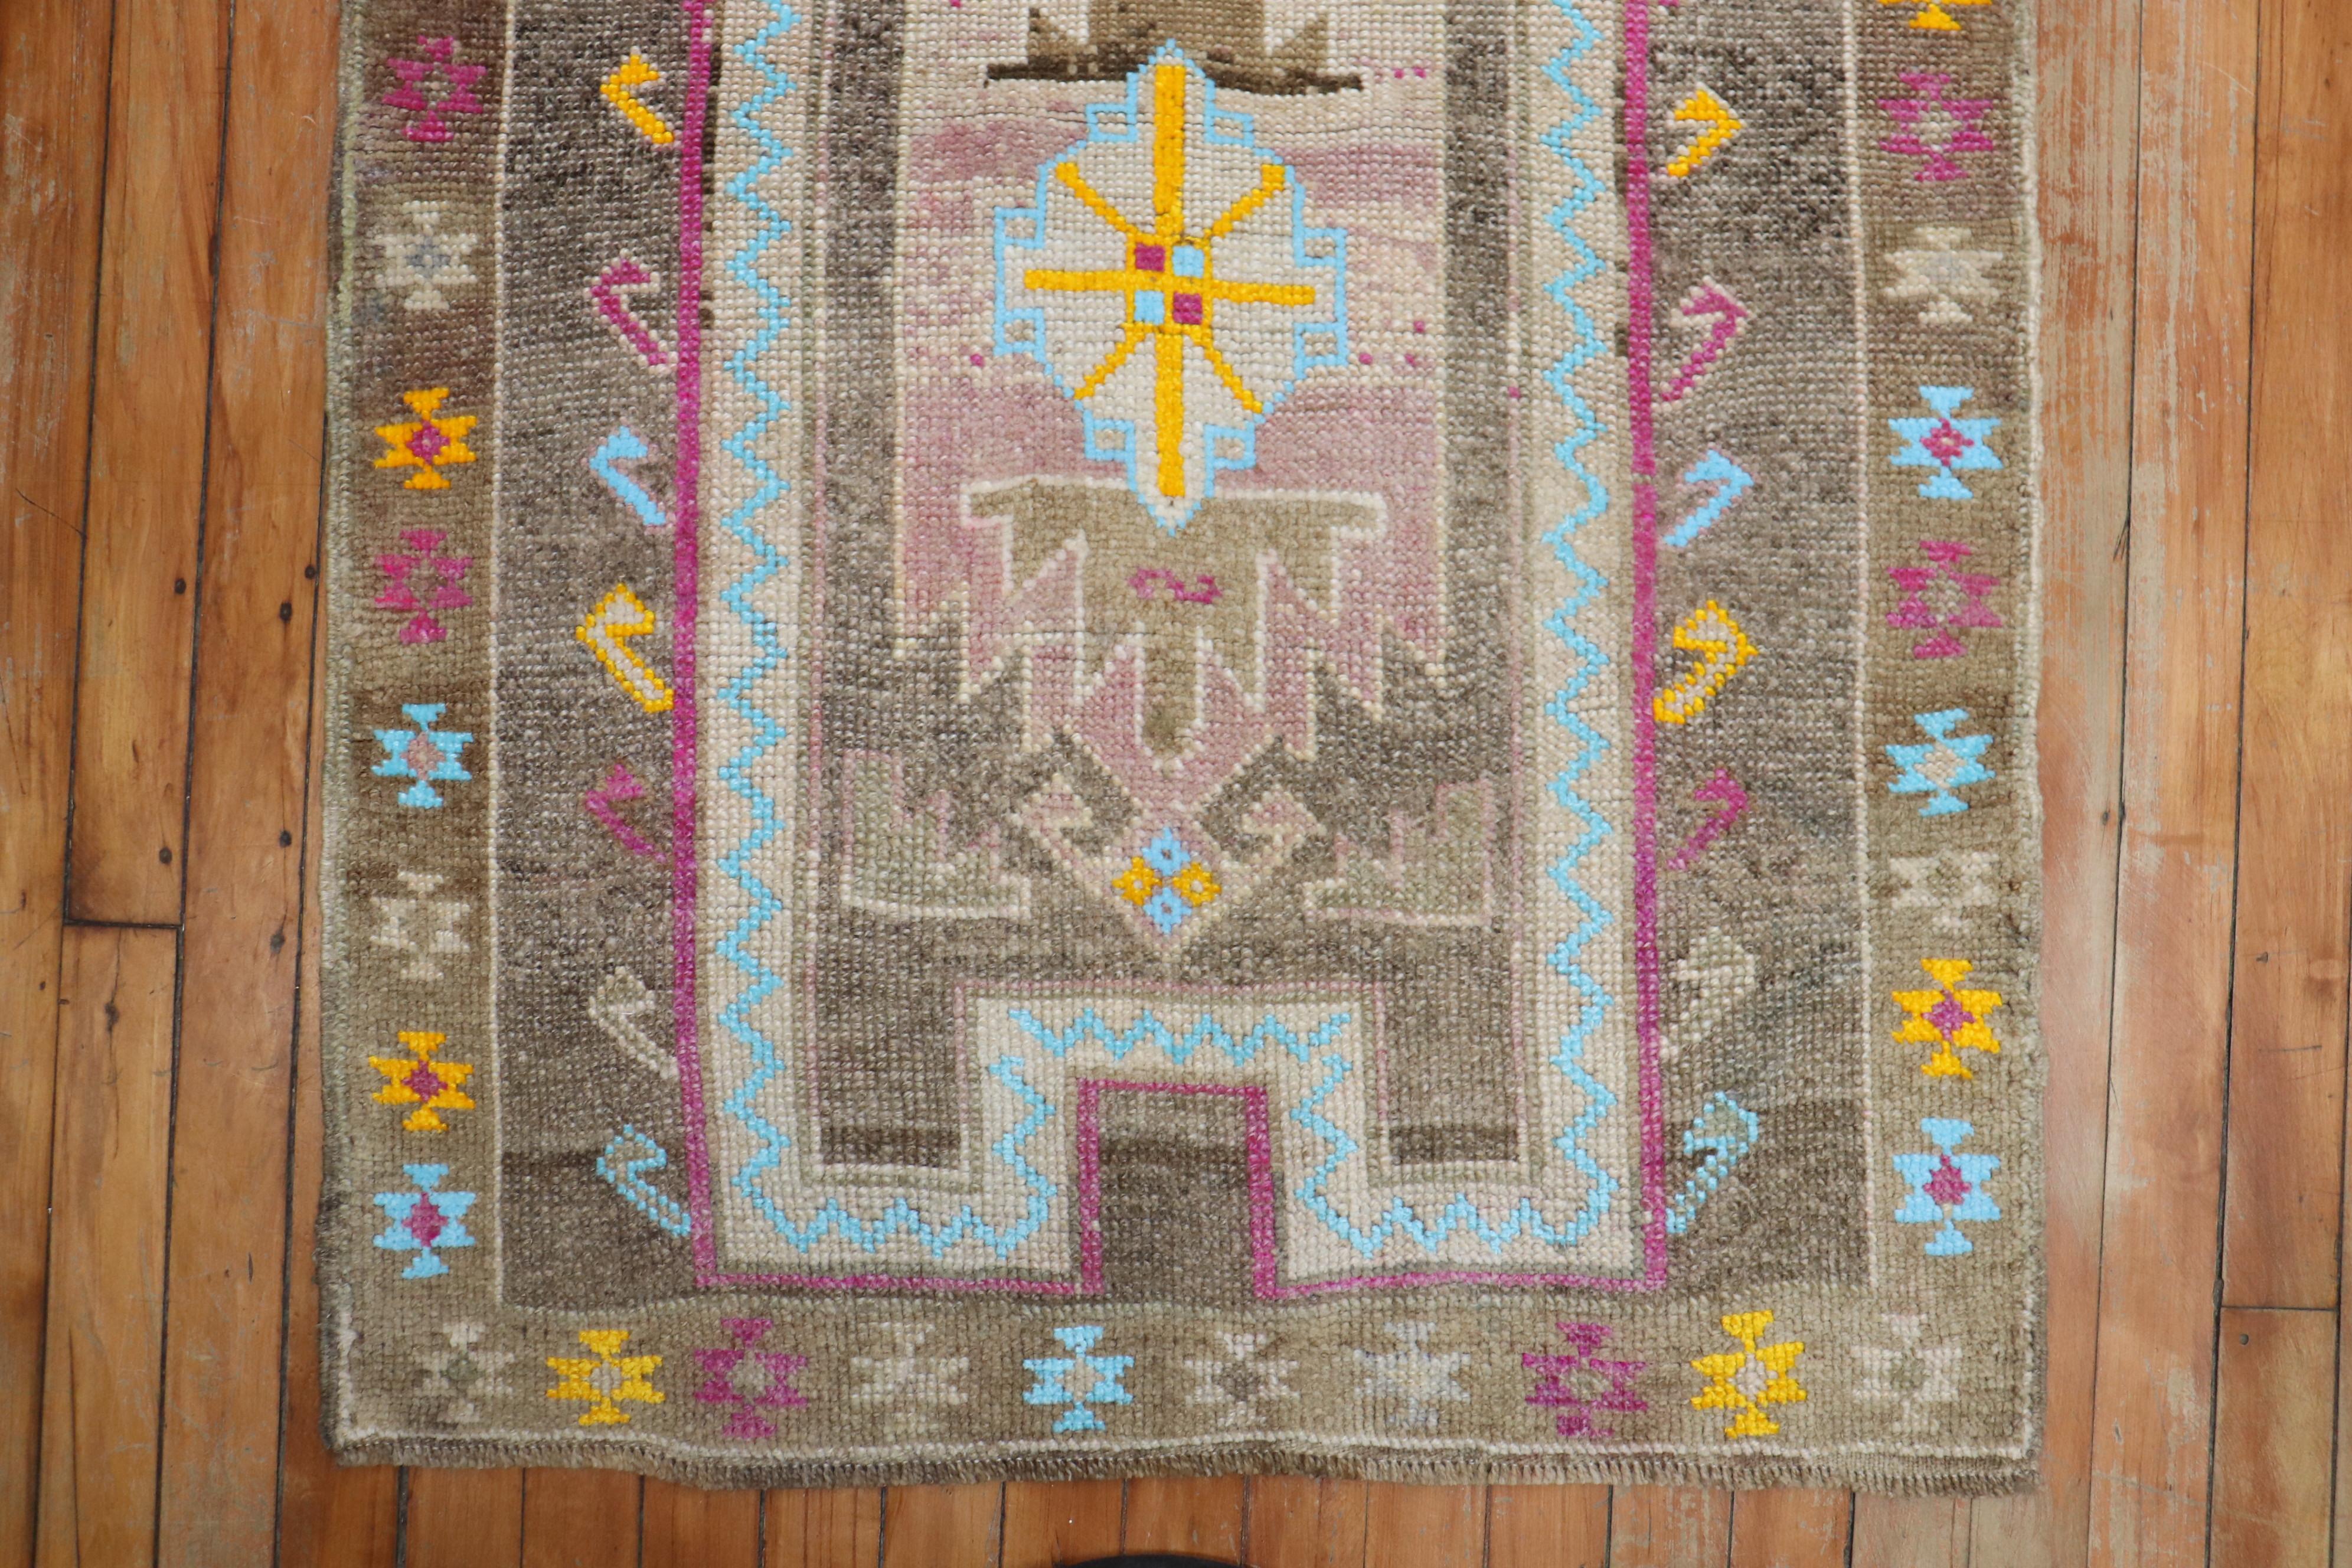 one of a kind eclectic turkish prayer rug from the kars region. We added some colorful wool to add some color pop. Oriignally from the 1950's

Measures: 2'8